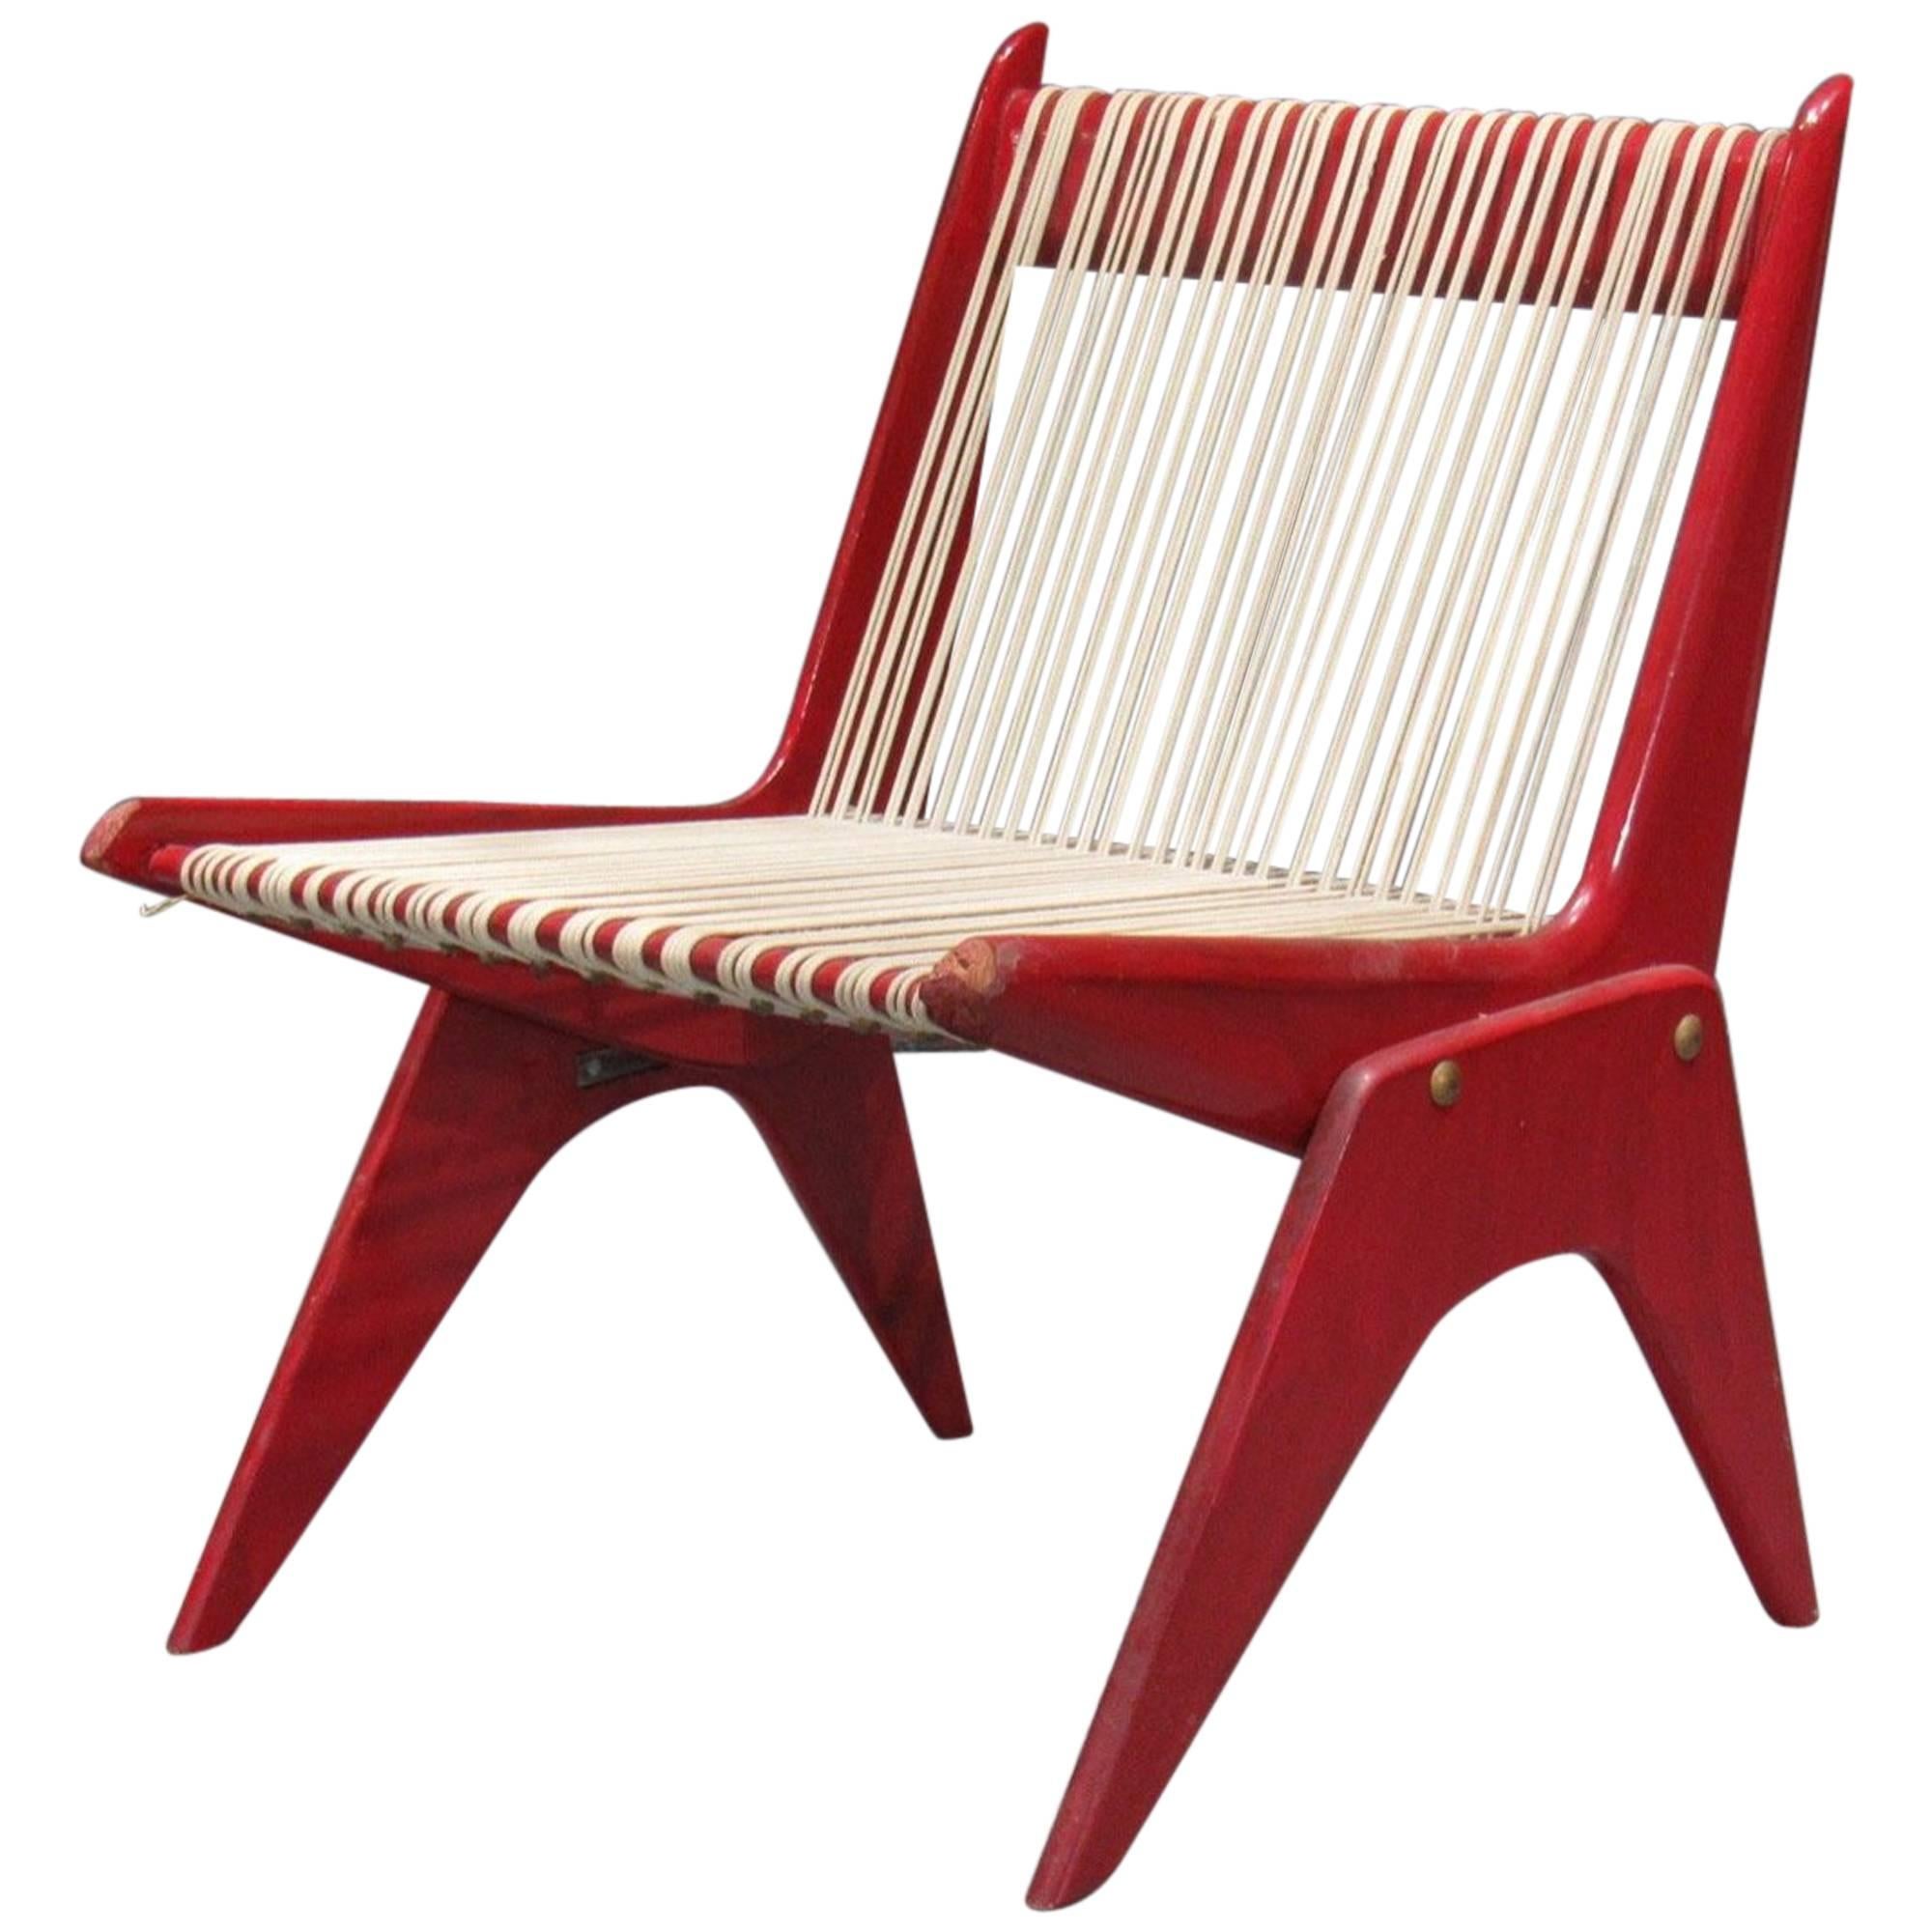 Red Painted Wood and Rope Scissor Chair